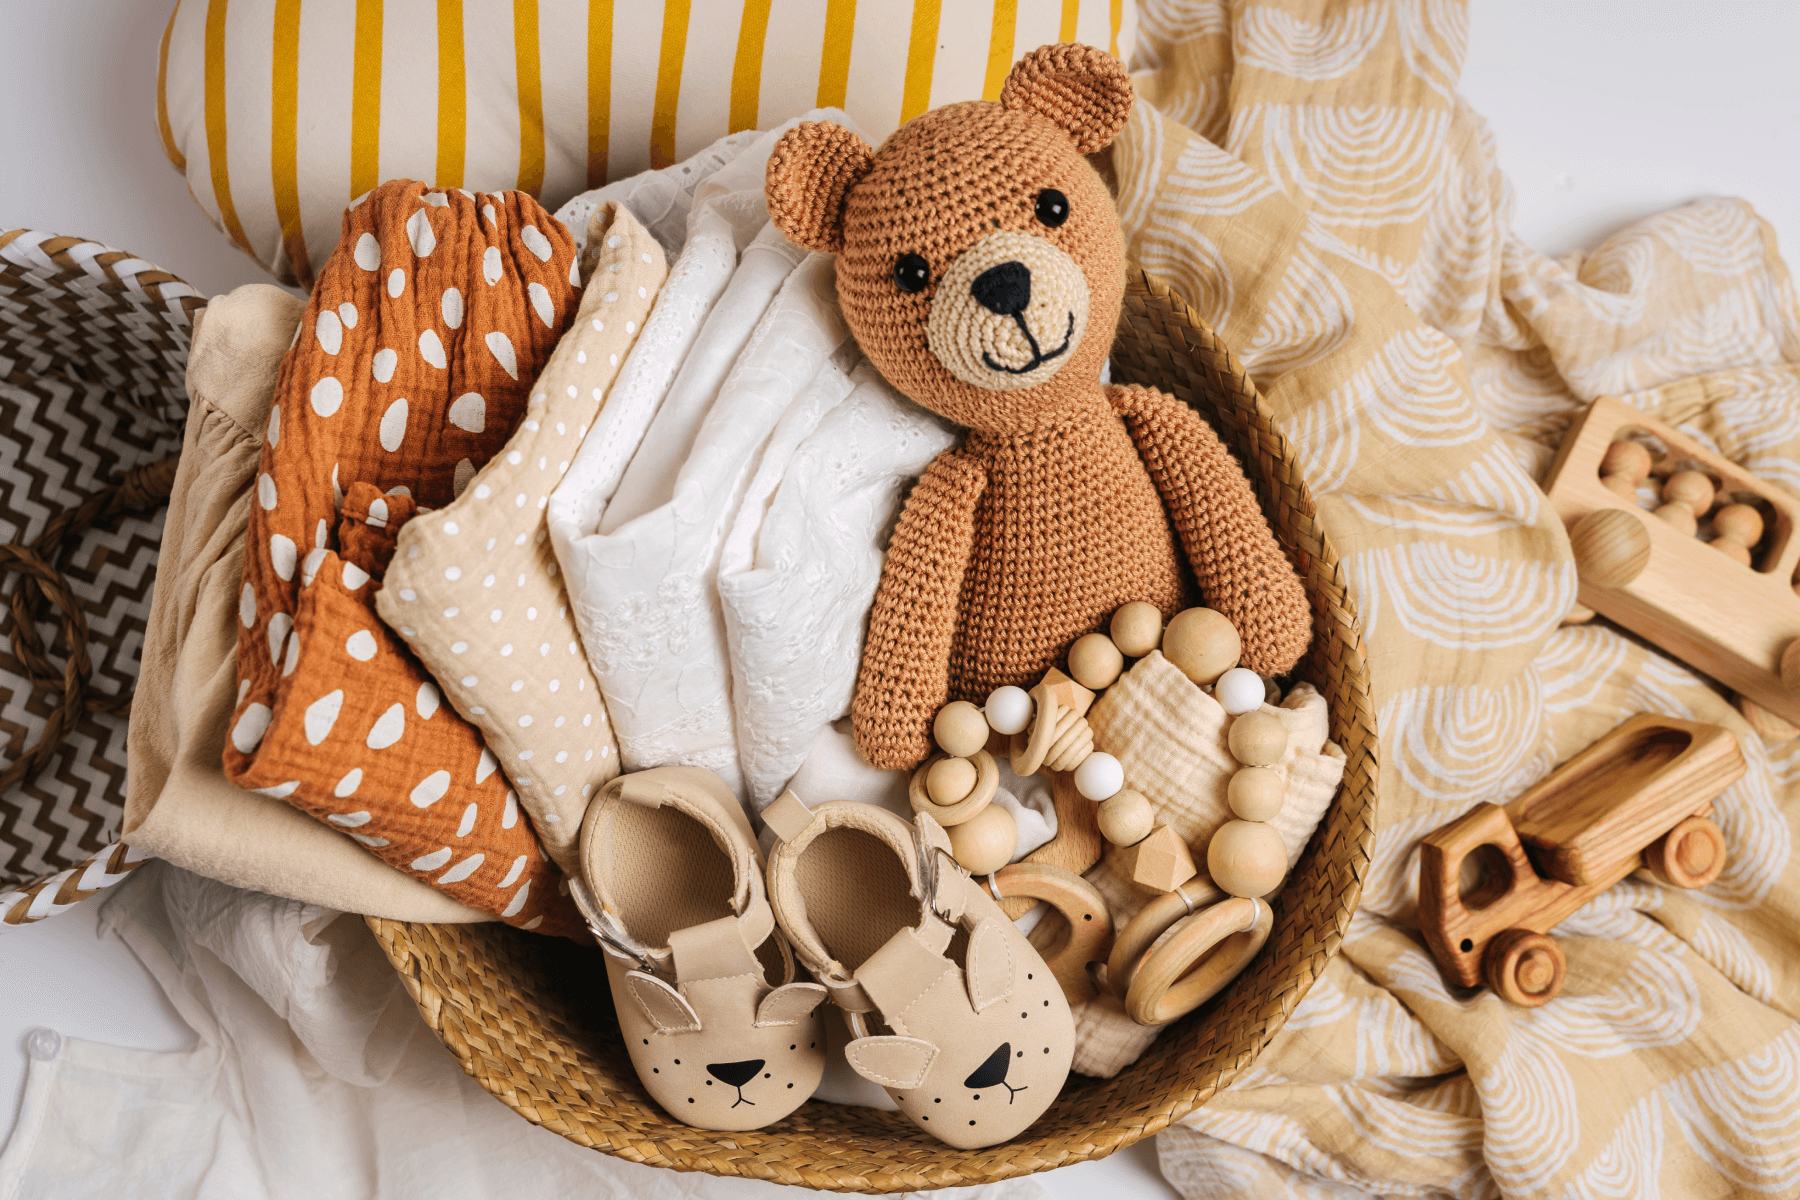 How to Make a Baby Registry & What to Include